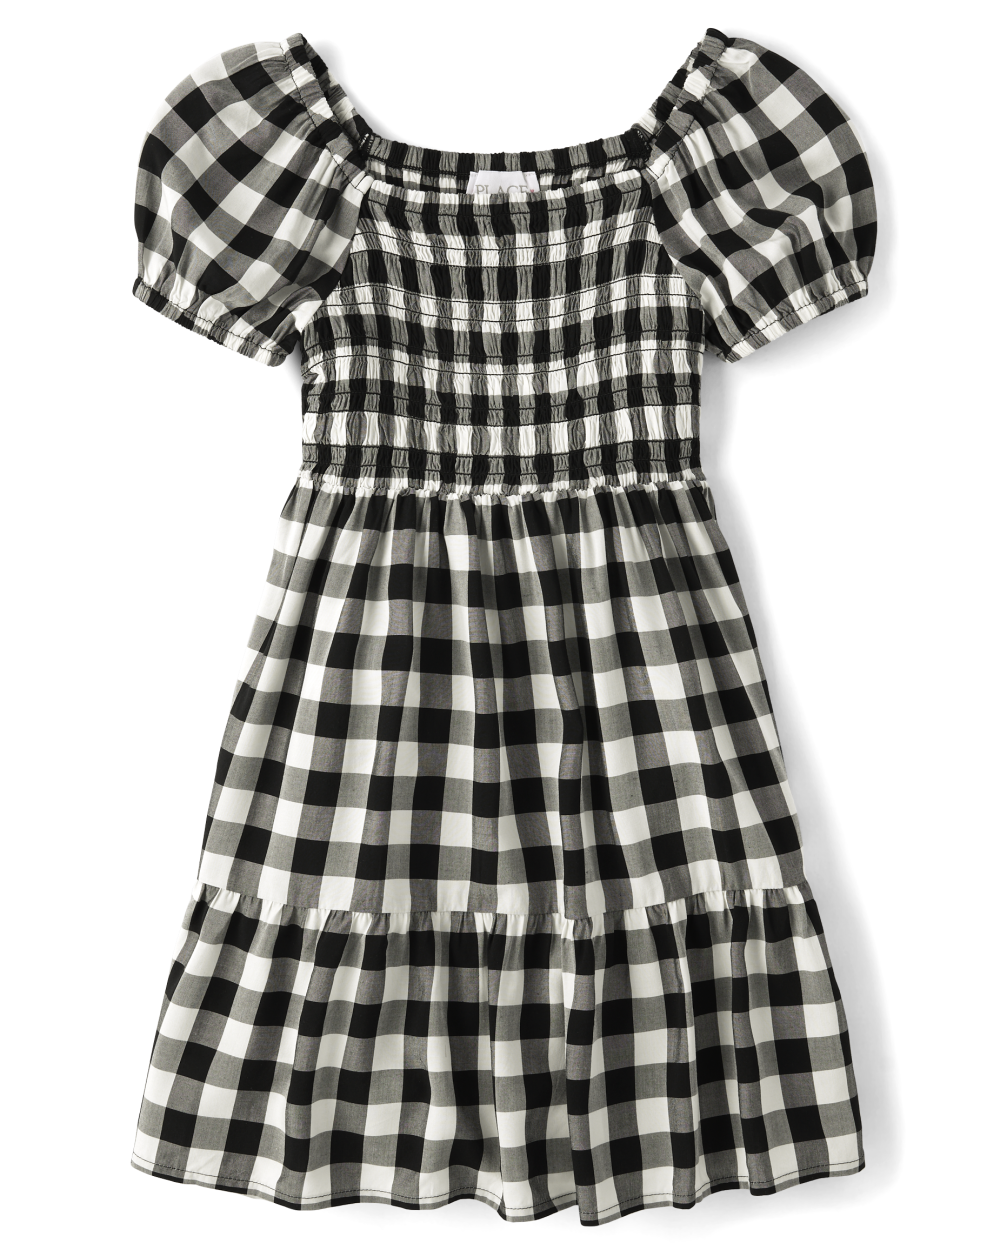 Girls Rayon Checkered Gingham Print Puff Sleeves Short Sleeves Sleeves Above the Knee Smocked Square Neck Dress With Ruffles